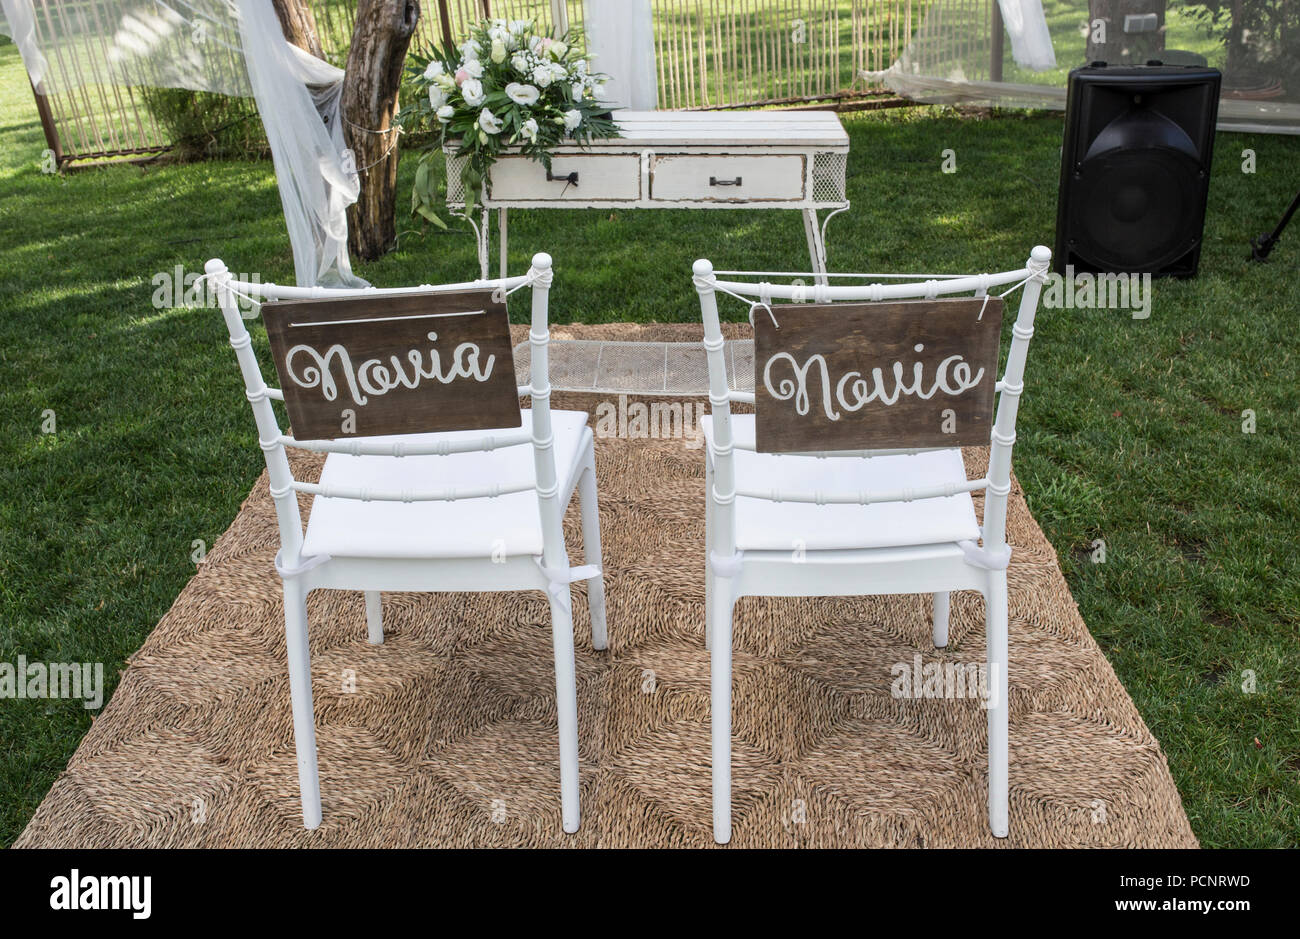 Chairs for bride and groom at altar. Spanish sign Novia y Novio Stock Photo